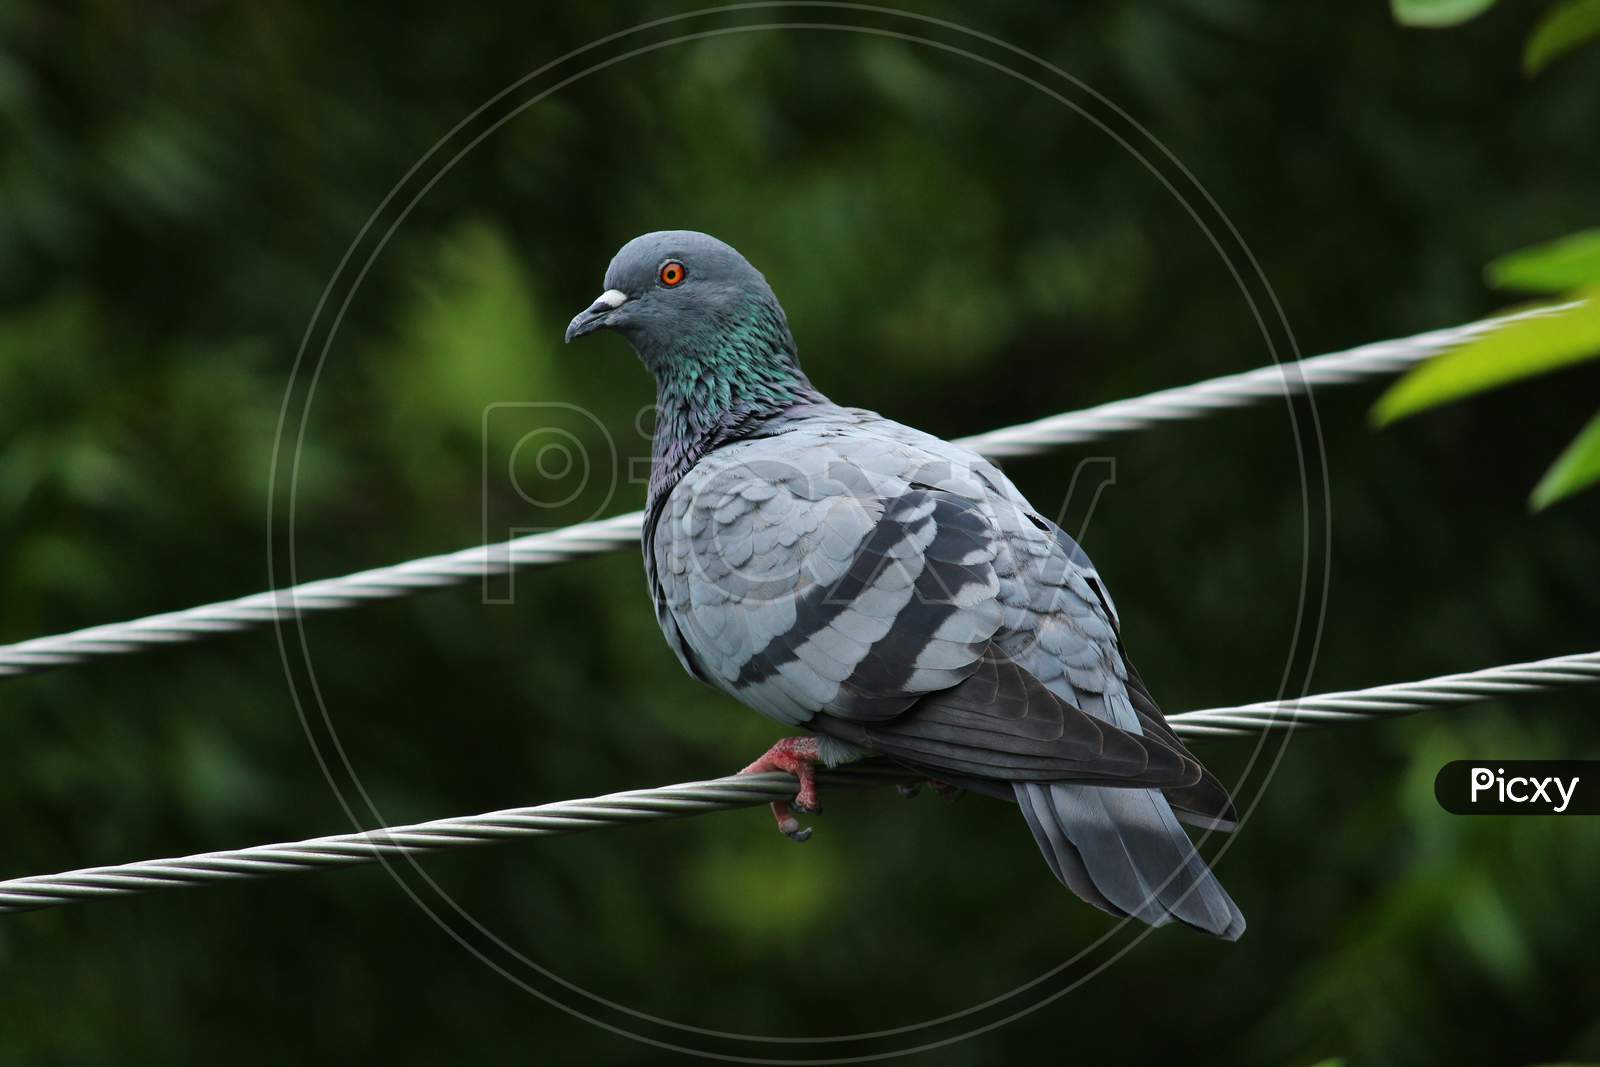 A Single Pigeon Sits On An Electric Line With A Green Background On The Outdoor. A Pigeon Perched On The Electrical Wiring.